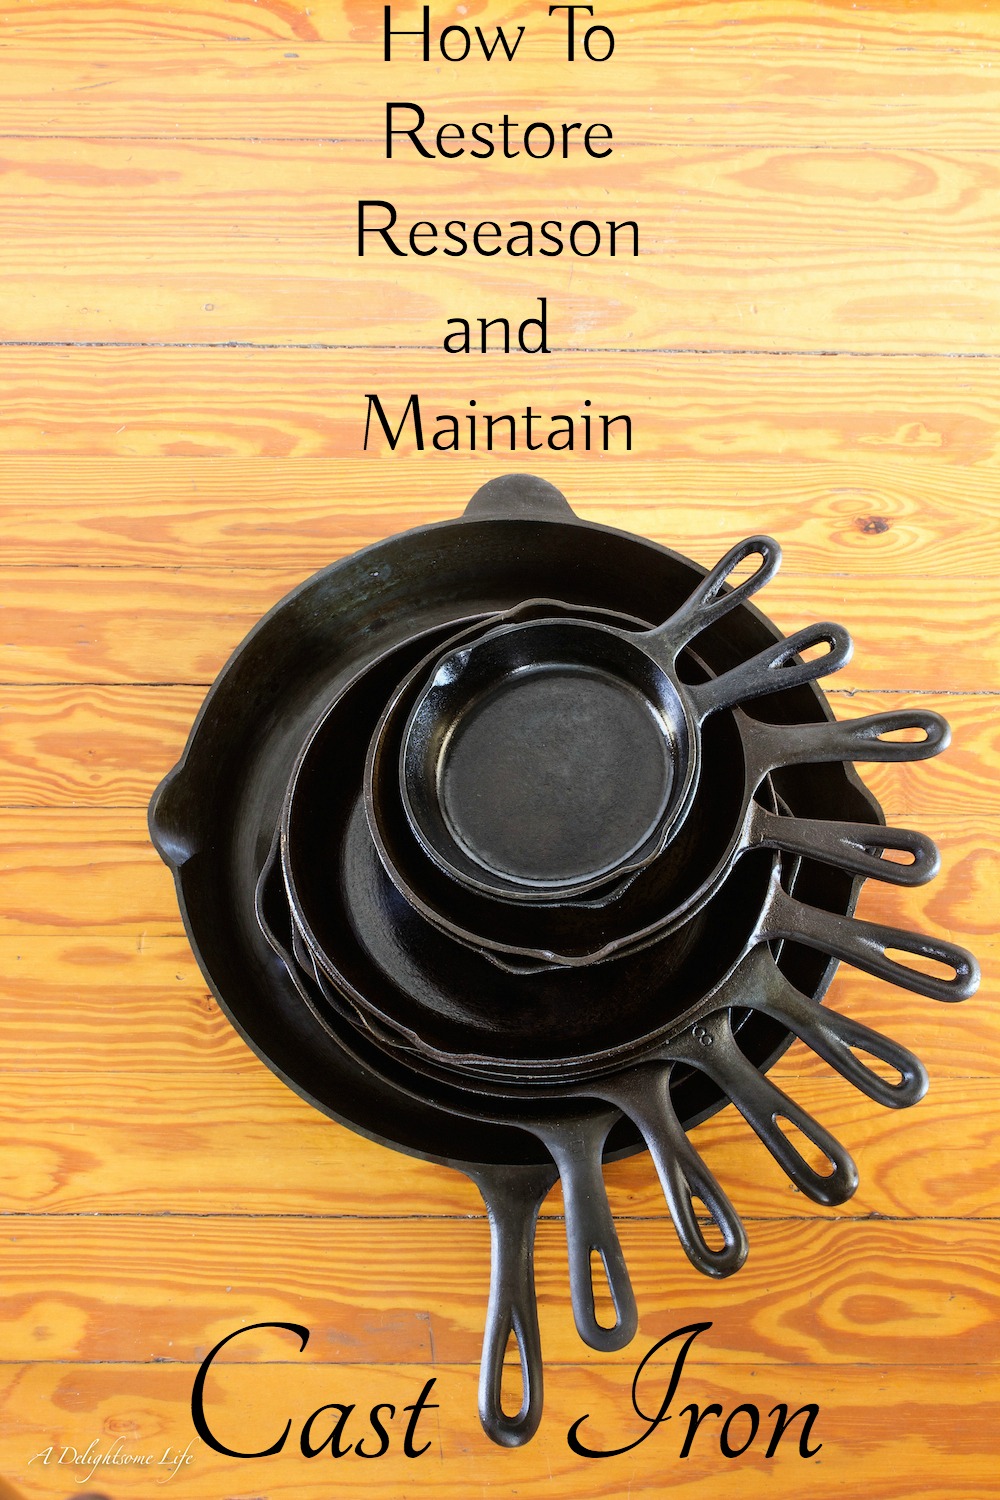 https://adelightsomelife.com/wp-content/uploads/2015/01/Cast-Iron-Pans-Reseasoned-how-to-restore-reseason-and-maintain-cast-iron.jpg